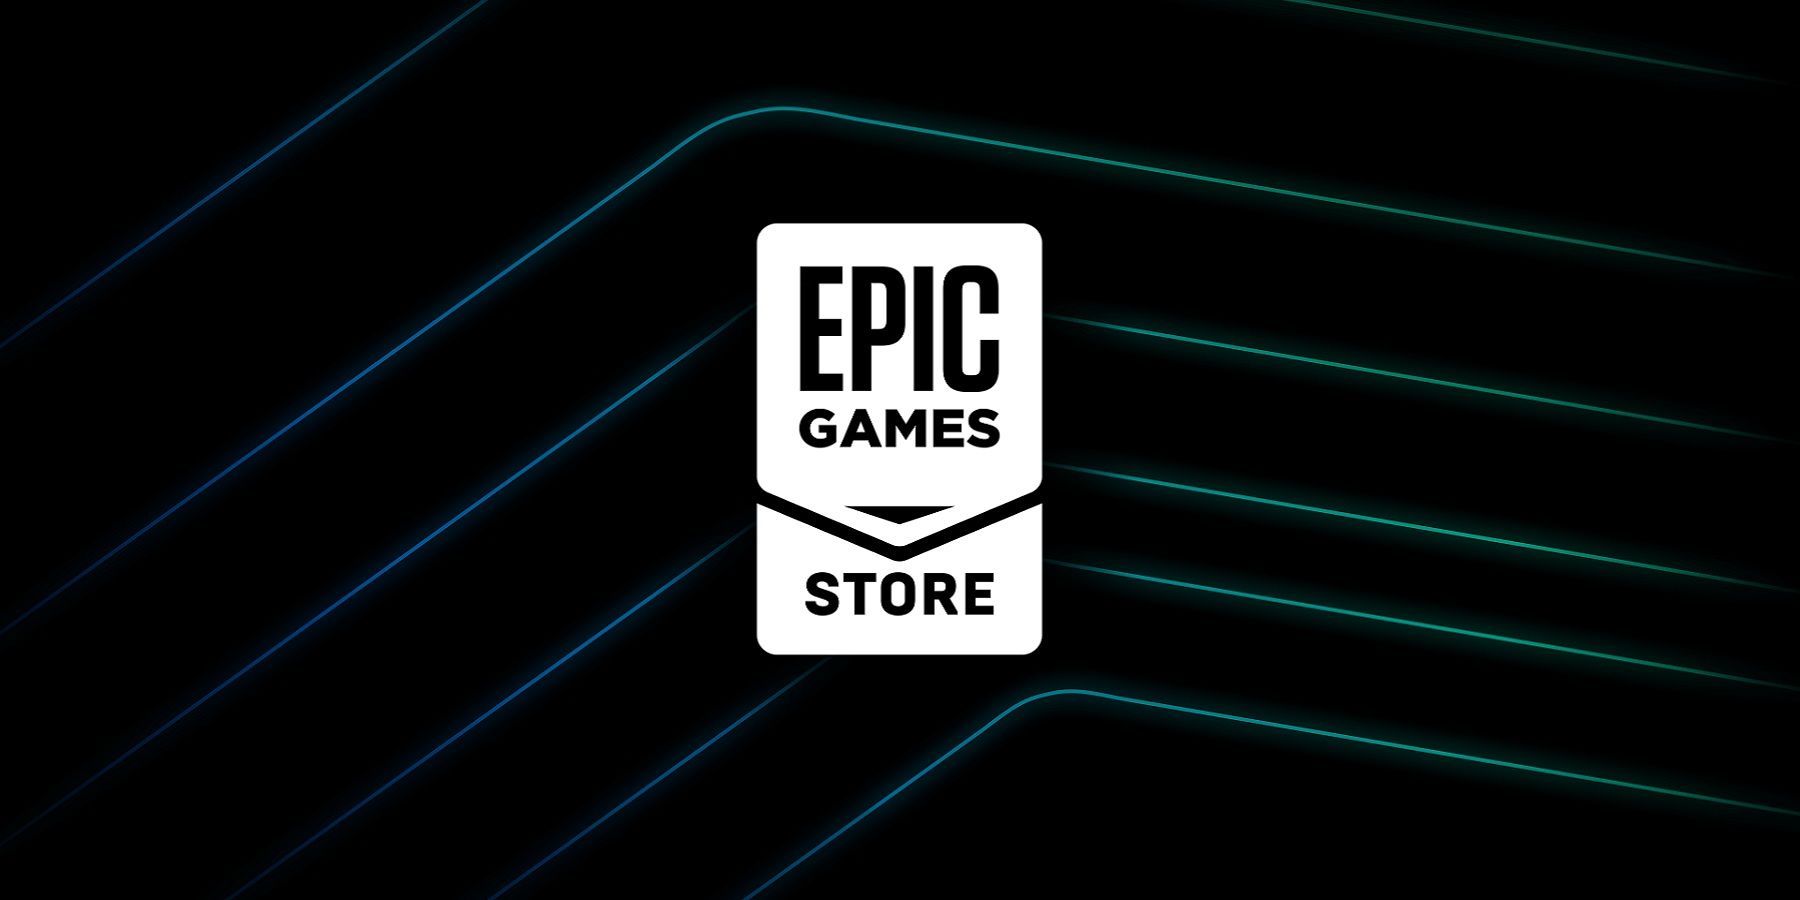 Train Valley 2 grátis na Epic Games Store